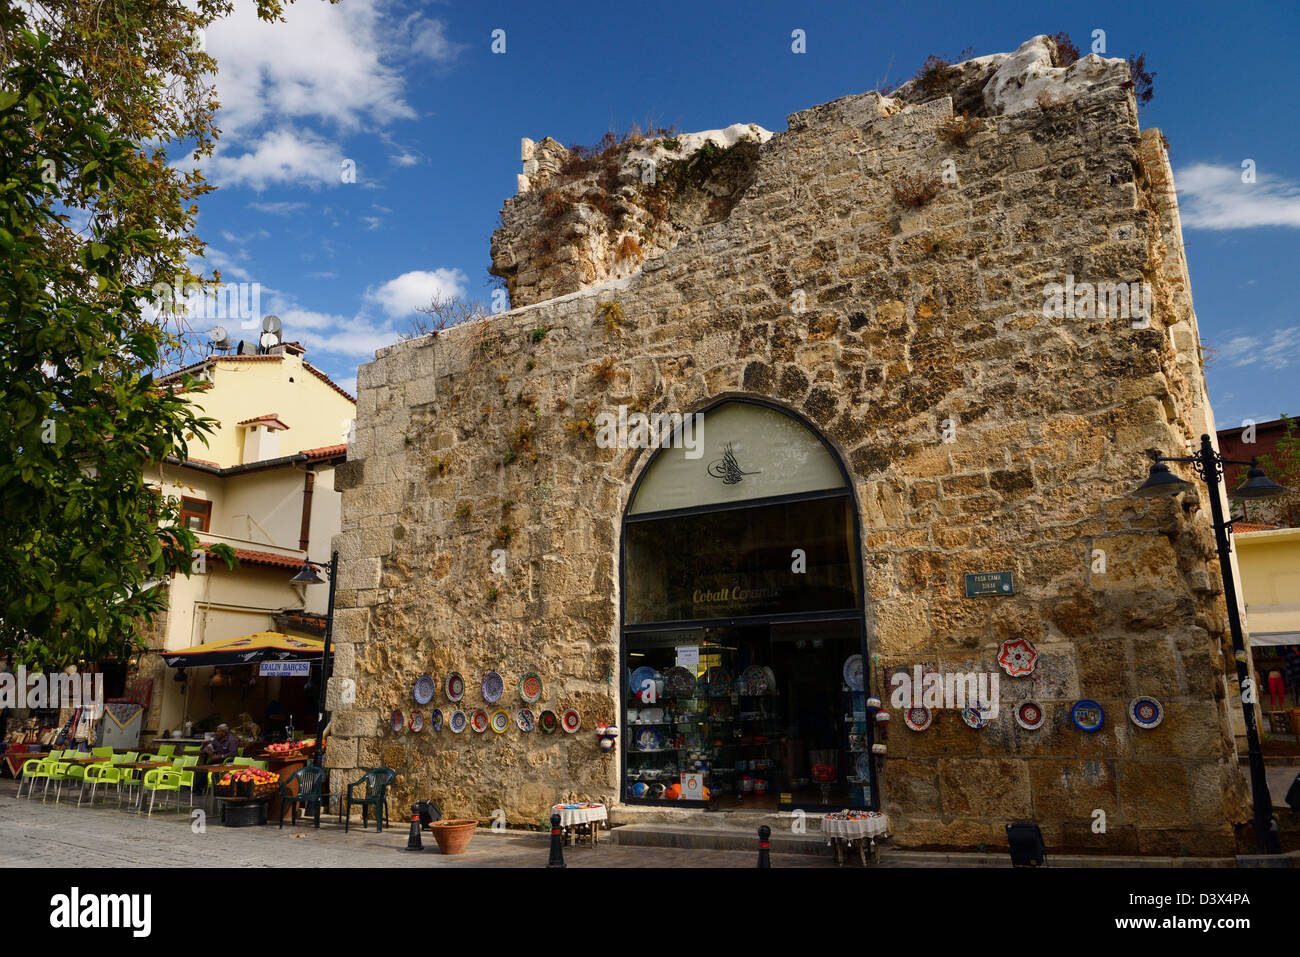 Antalya street with shops and ancient stone building used as a china store in Turkey Stock Photo